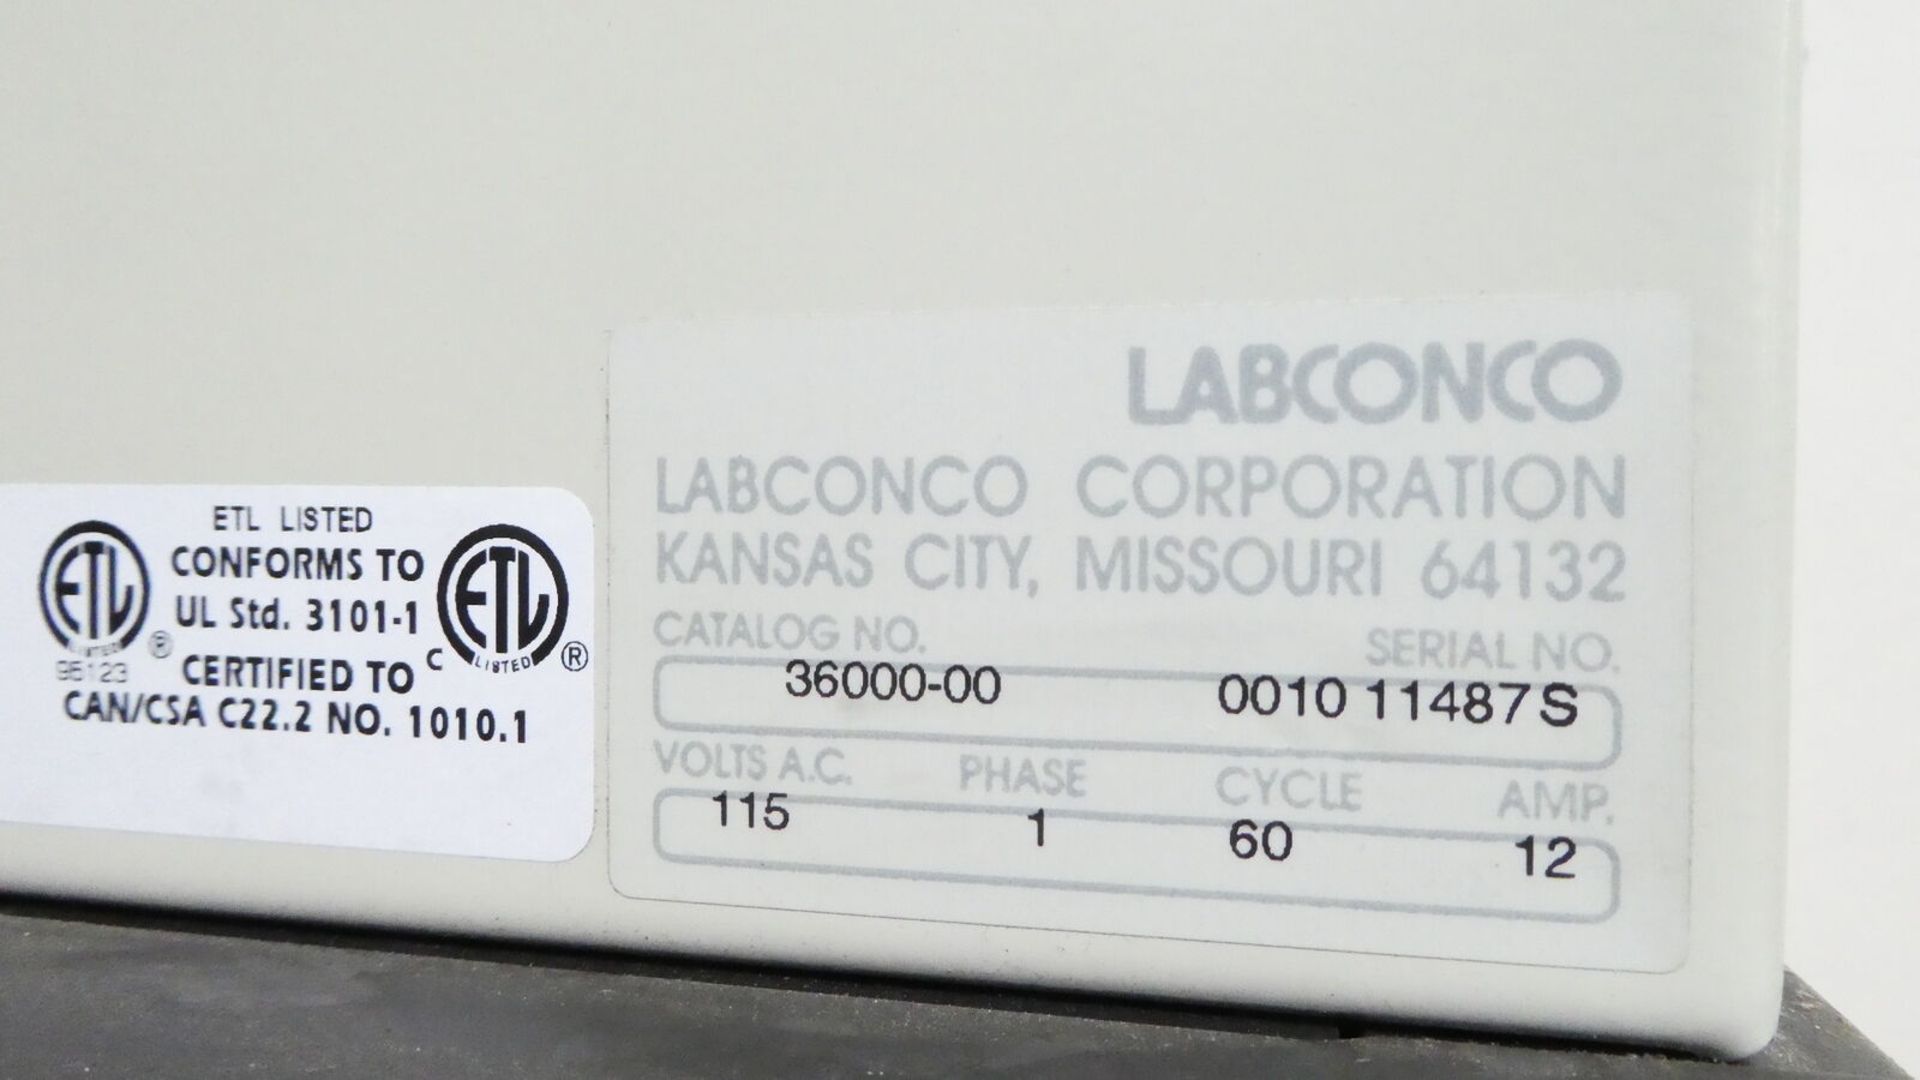 Labconco Purifier Lab Clean Bench 36000-00 - Image 5 of 7